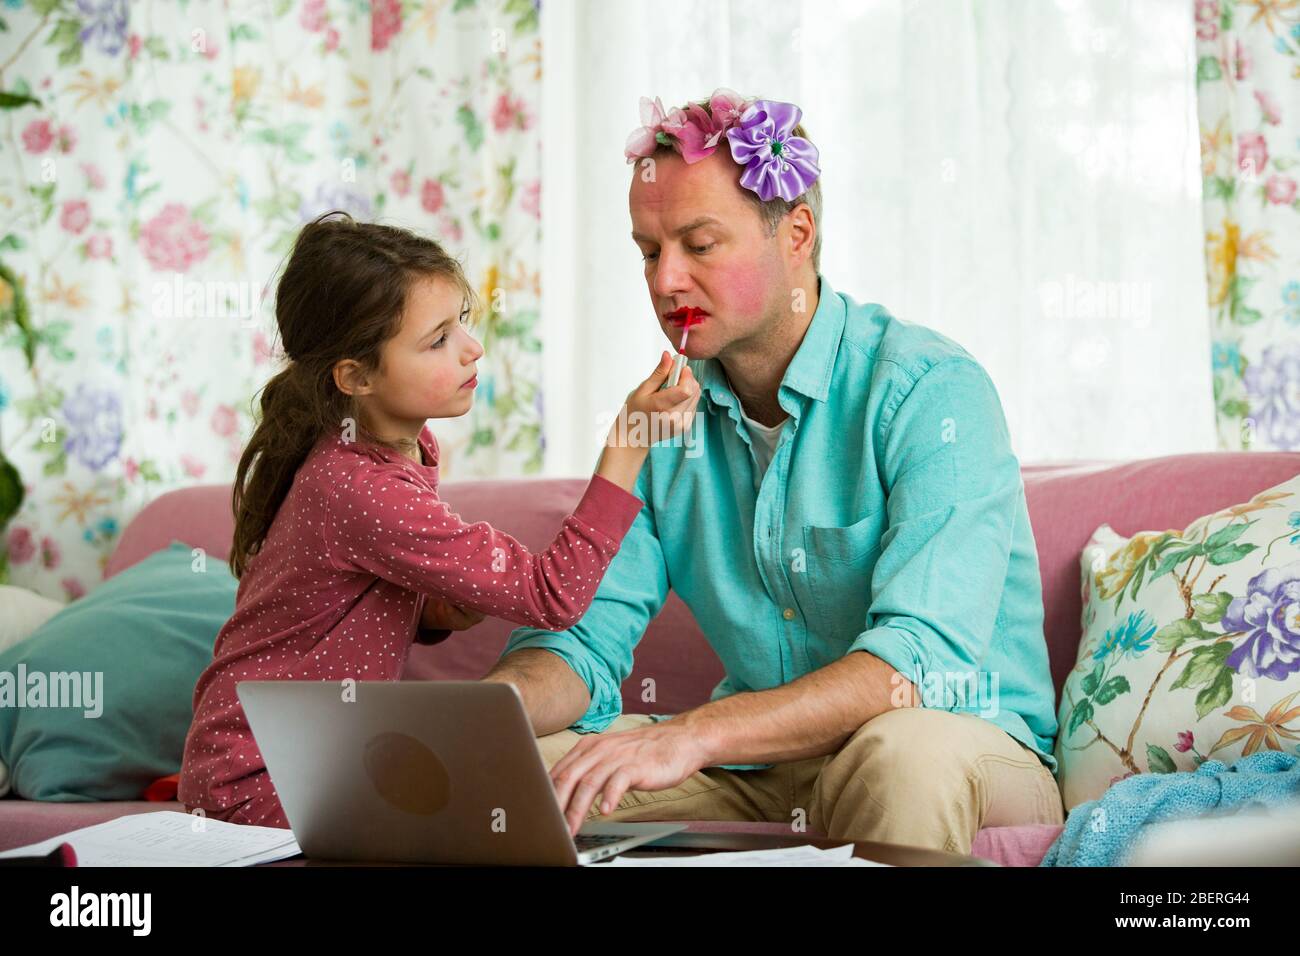 Child playing and disturbing father working remotely from home. Little girl applying makeup. Man sitting on couch with laptop. Family spending time to Stock Photo